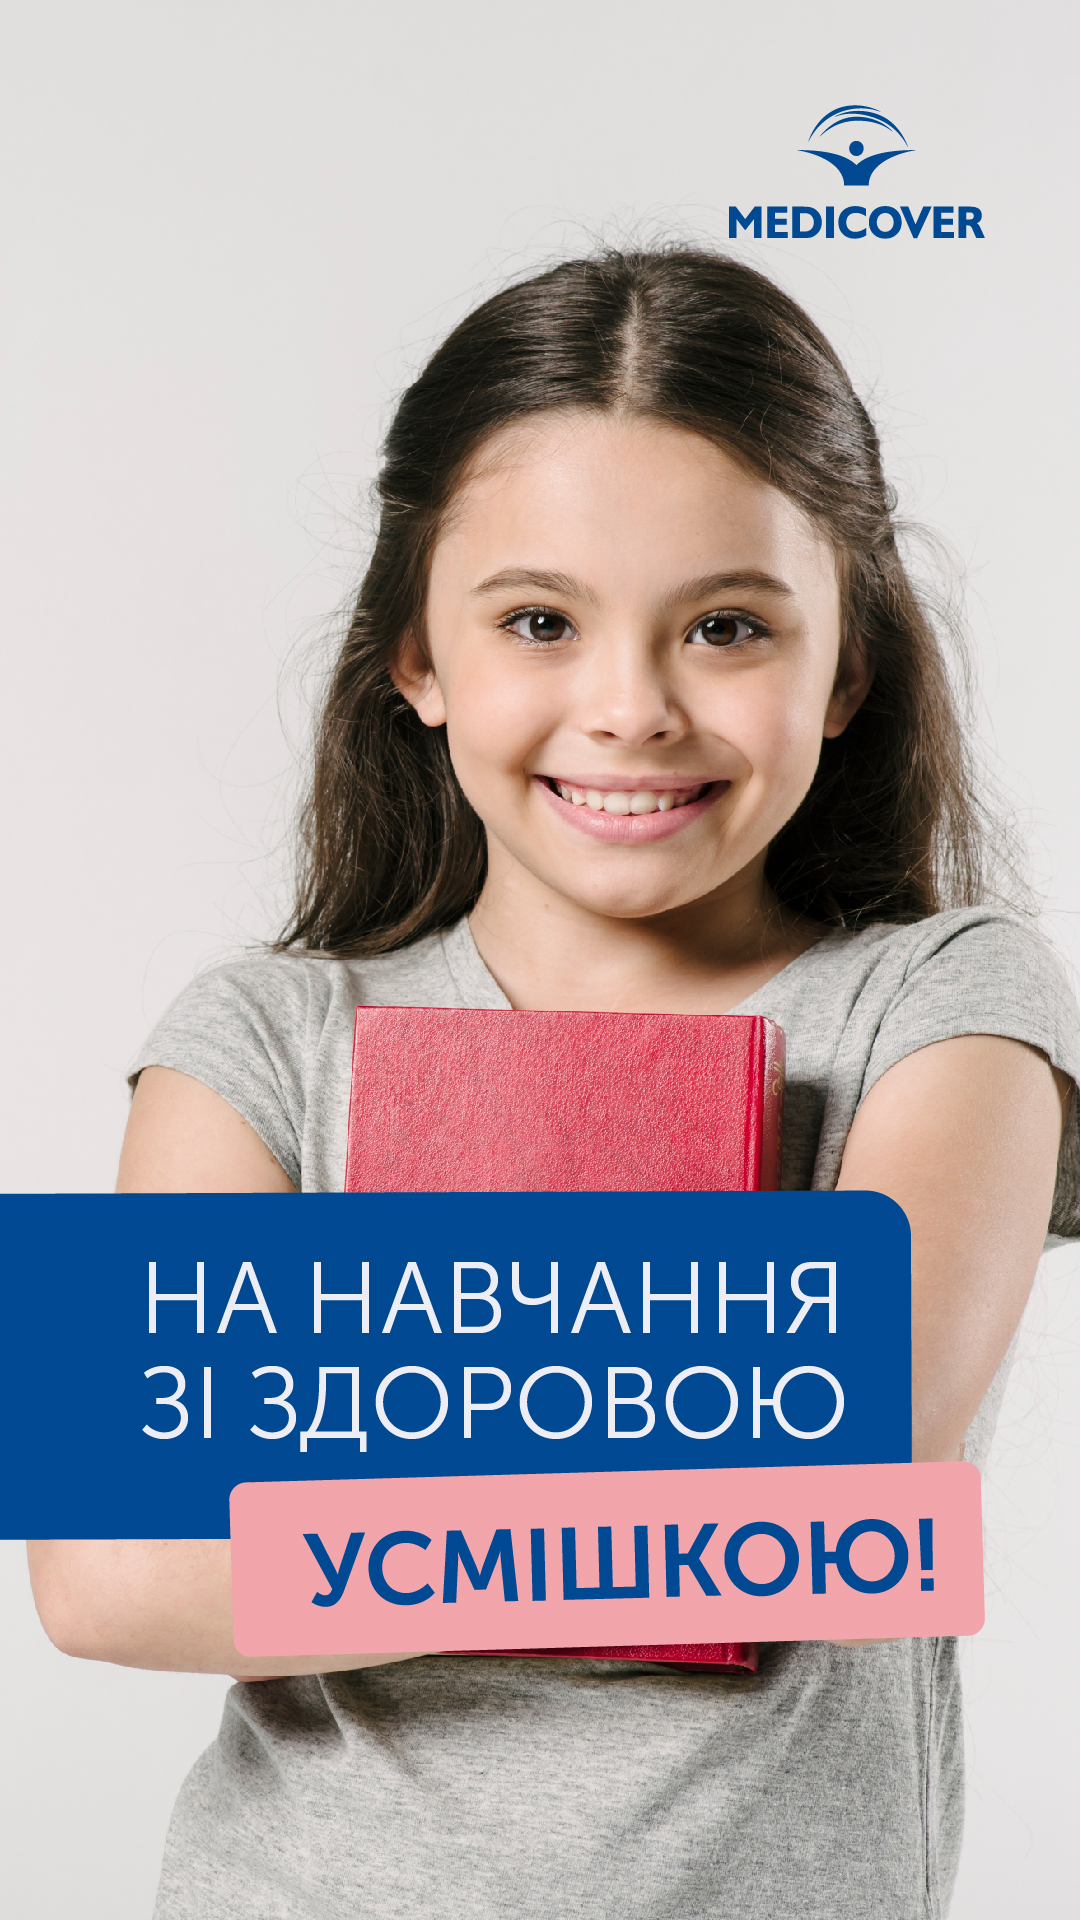 To study with a healthy smile!